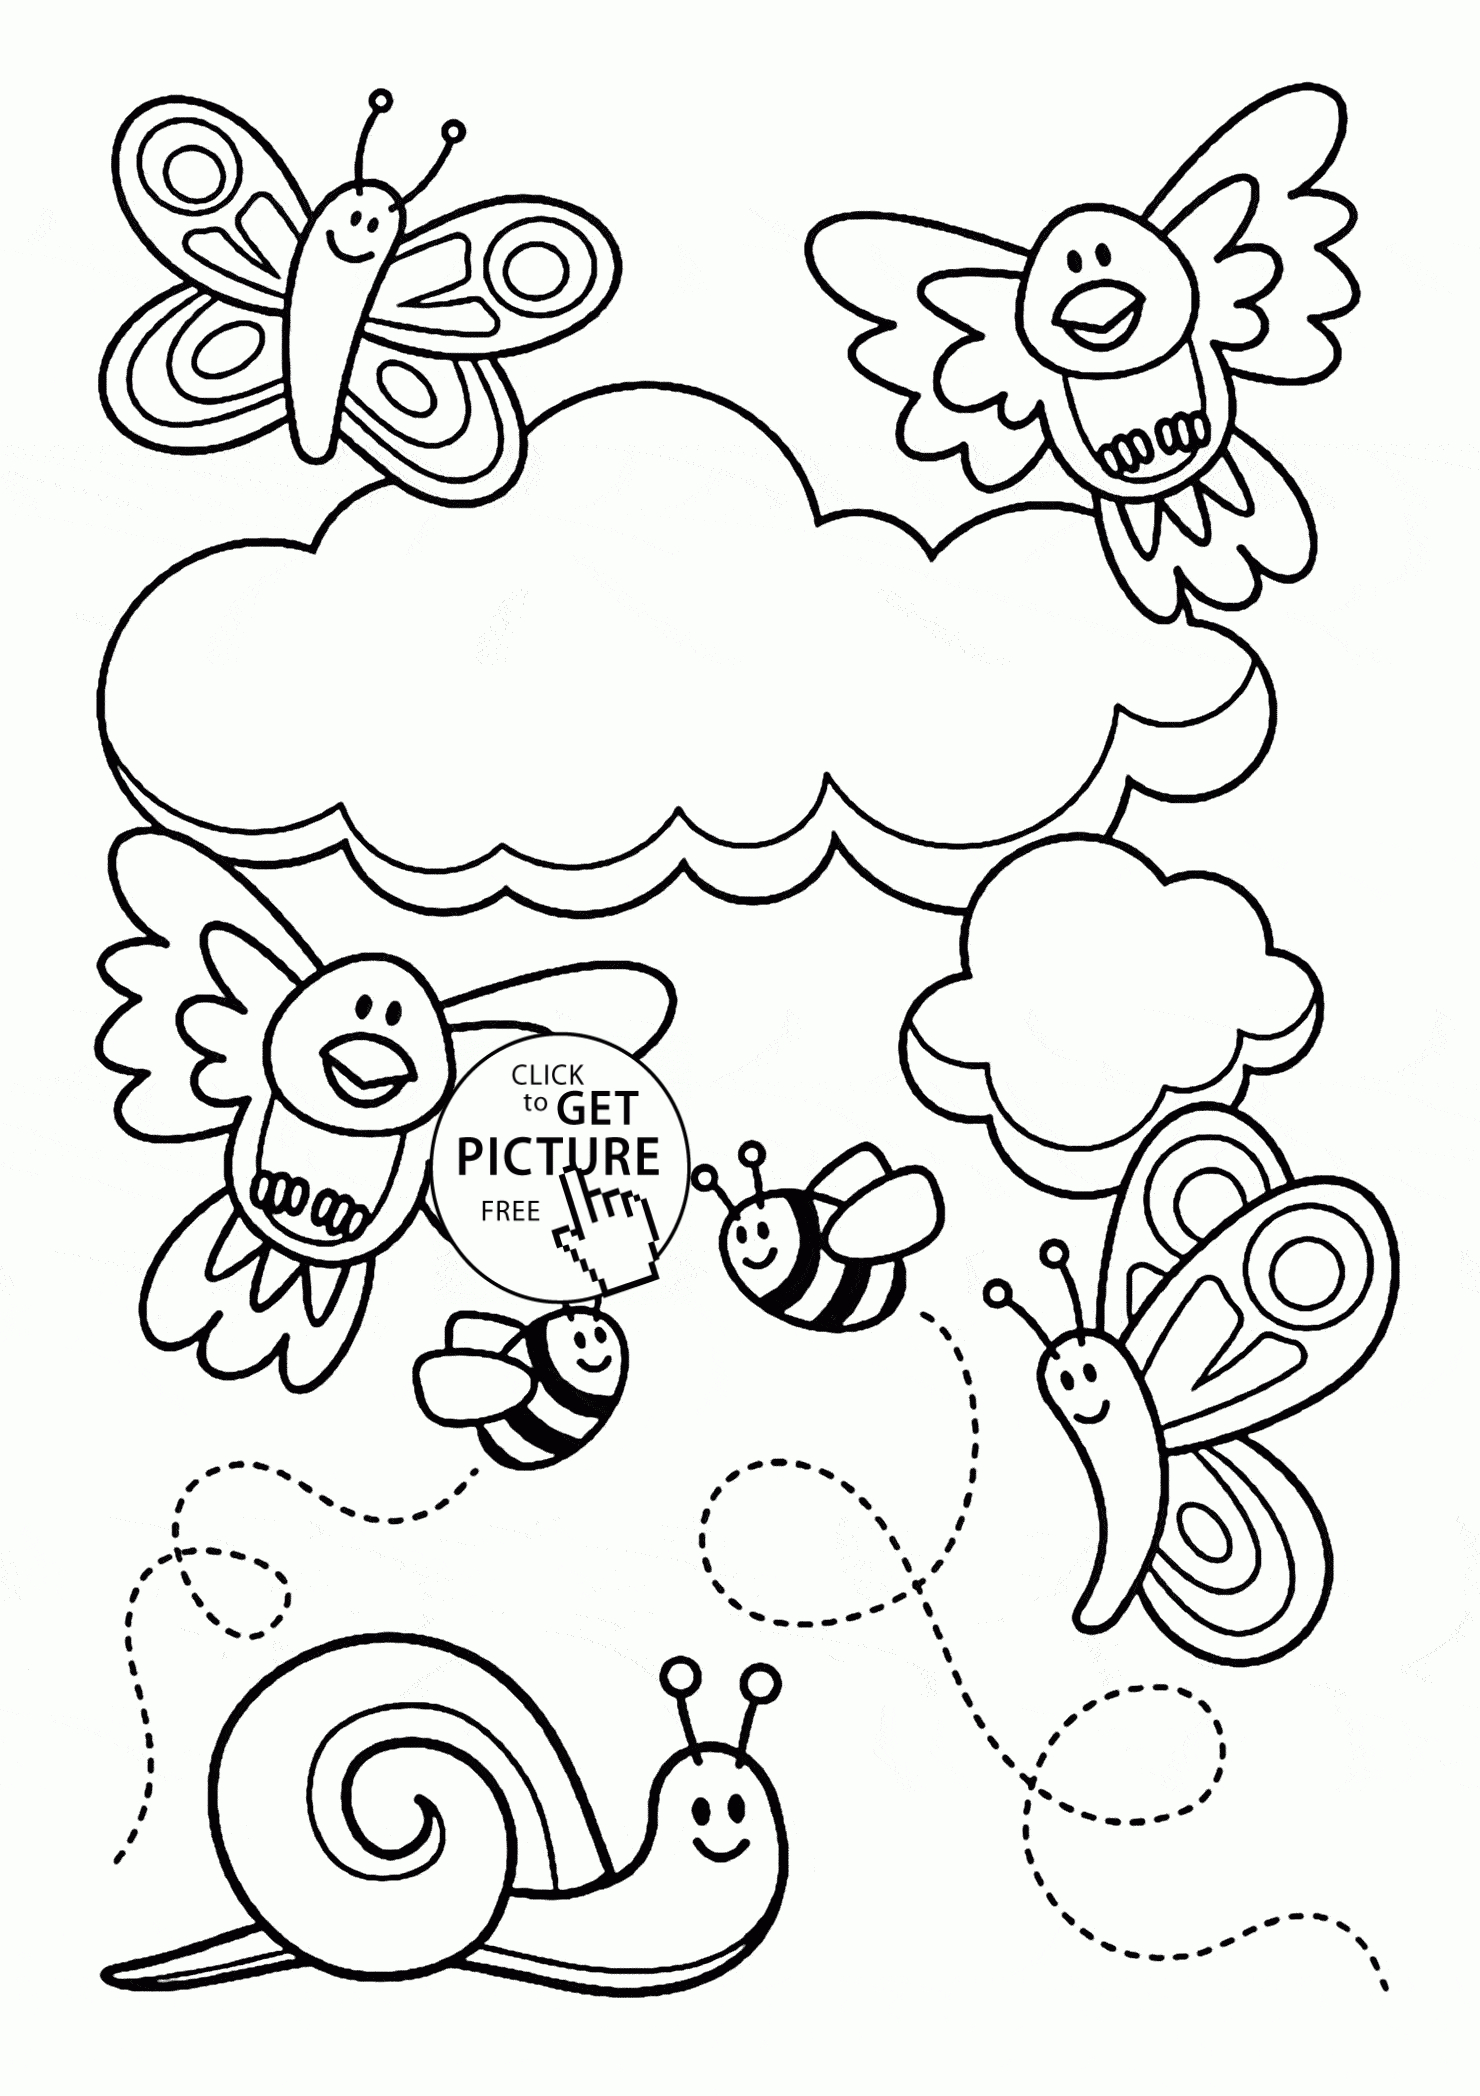 Baby Animal And Spring Coloring Page For Kids, Seasons Coloring - Free Printable Pictures Of Baby Animals